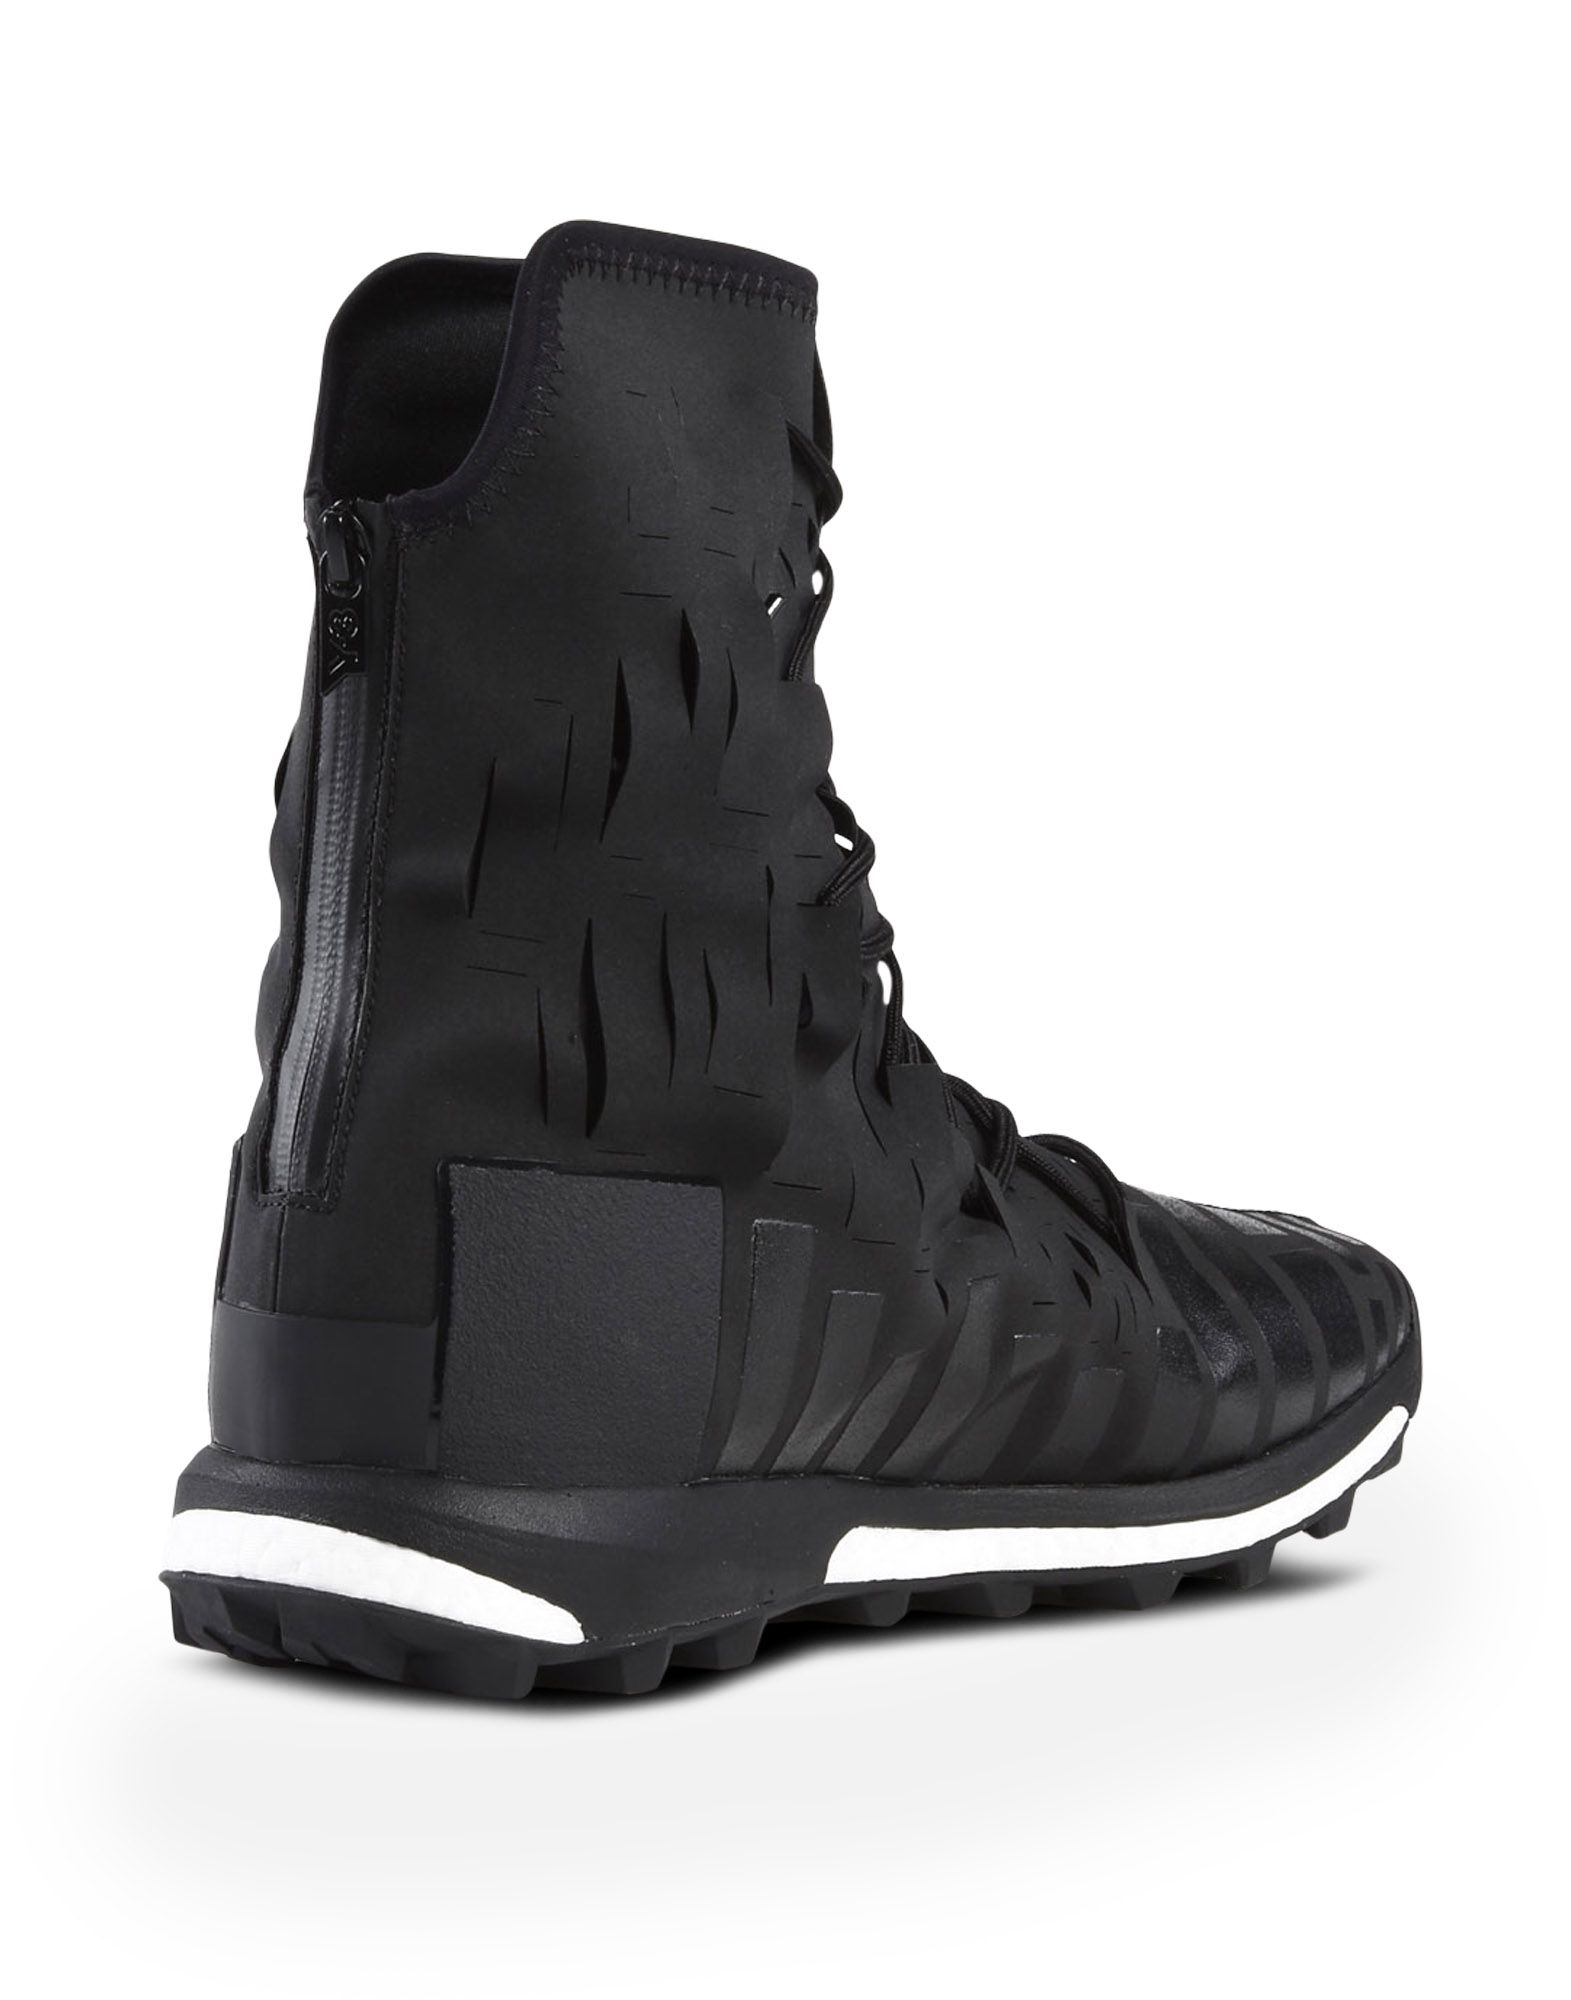 Y 3 SPORT EVASION HIGH for Men | Adidas Y-3 Official Store